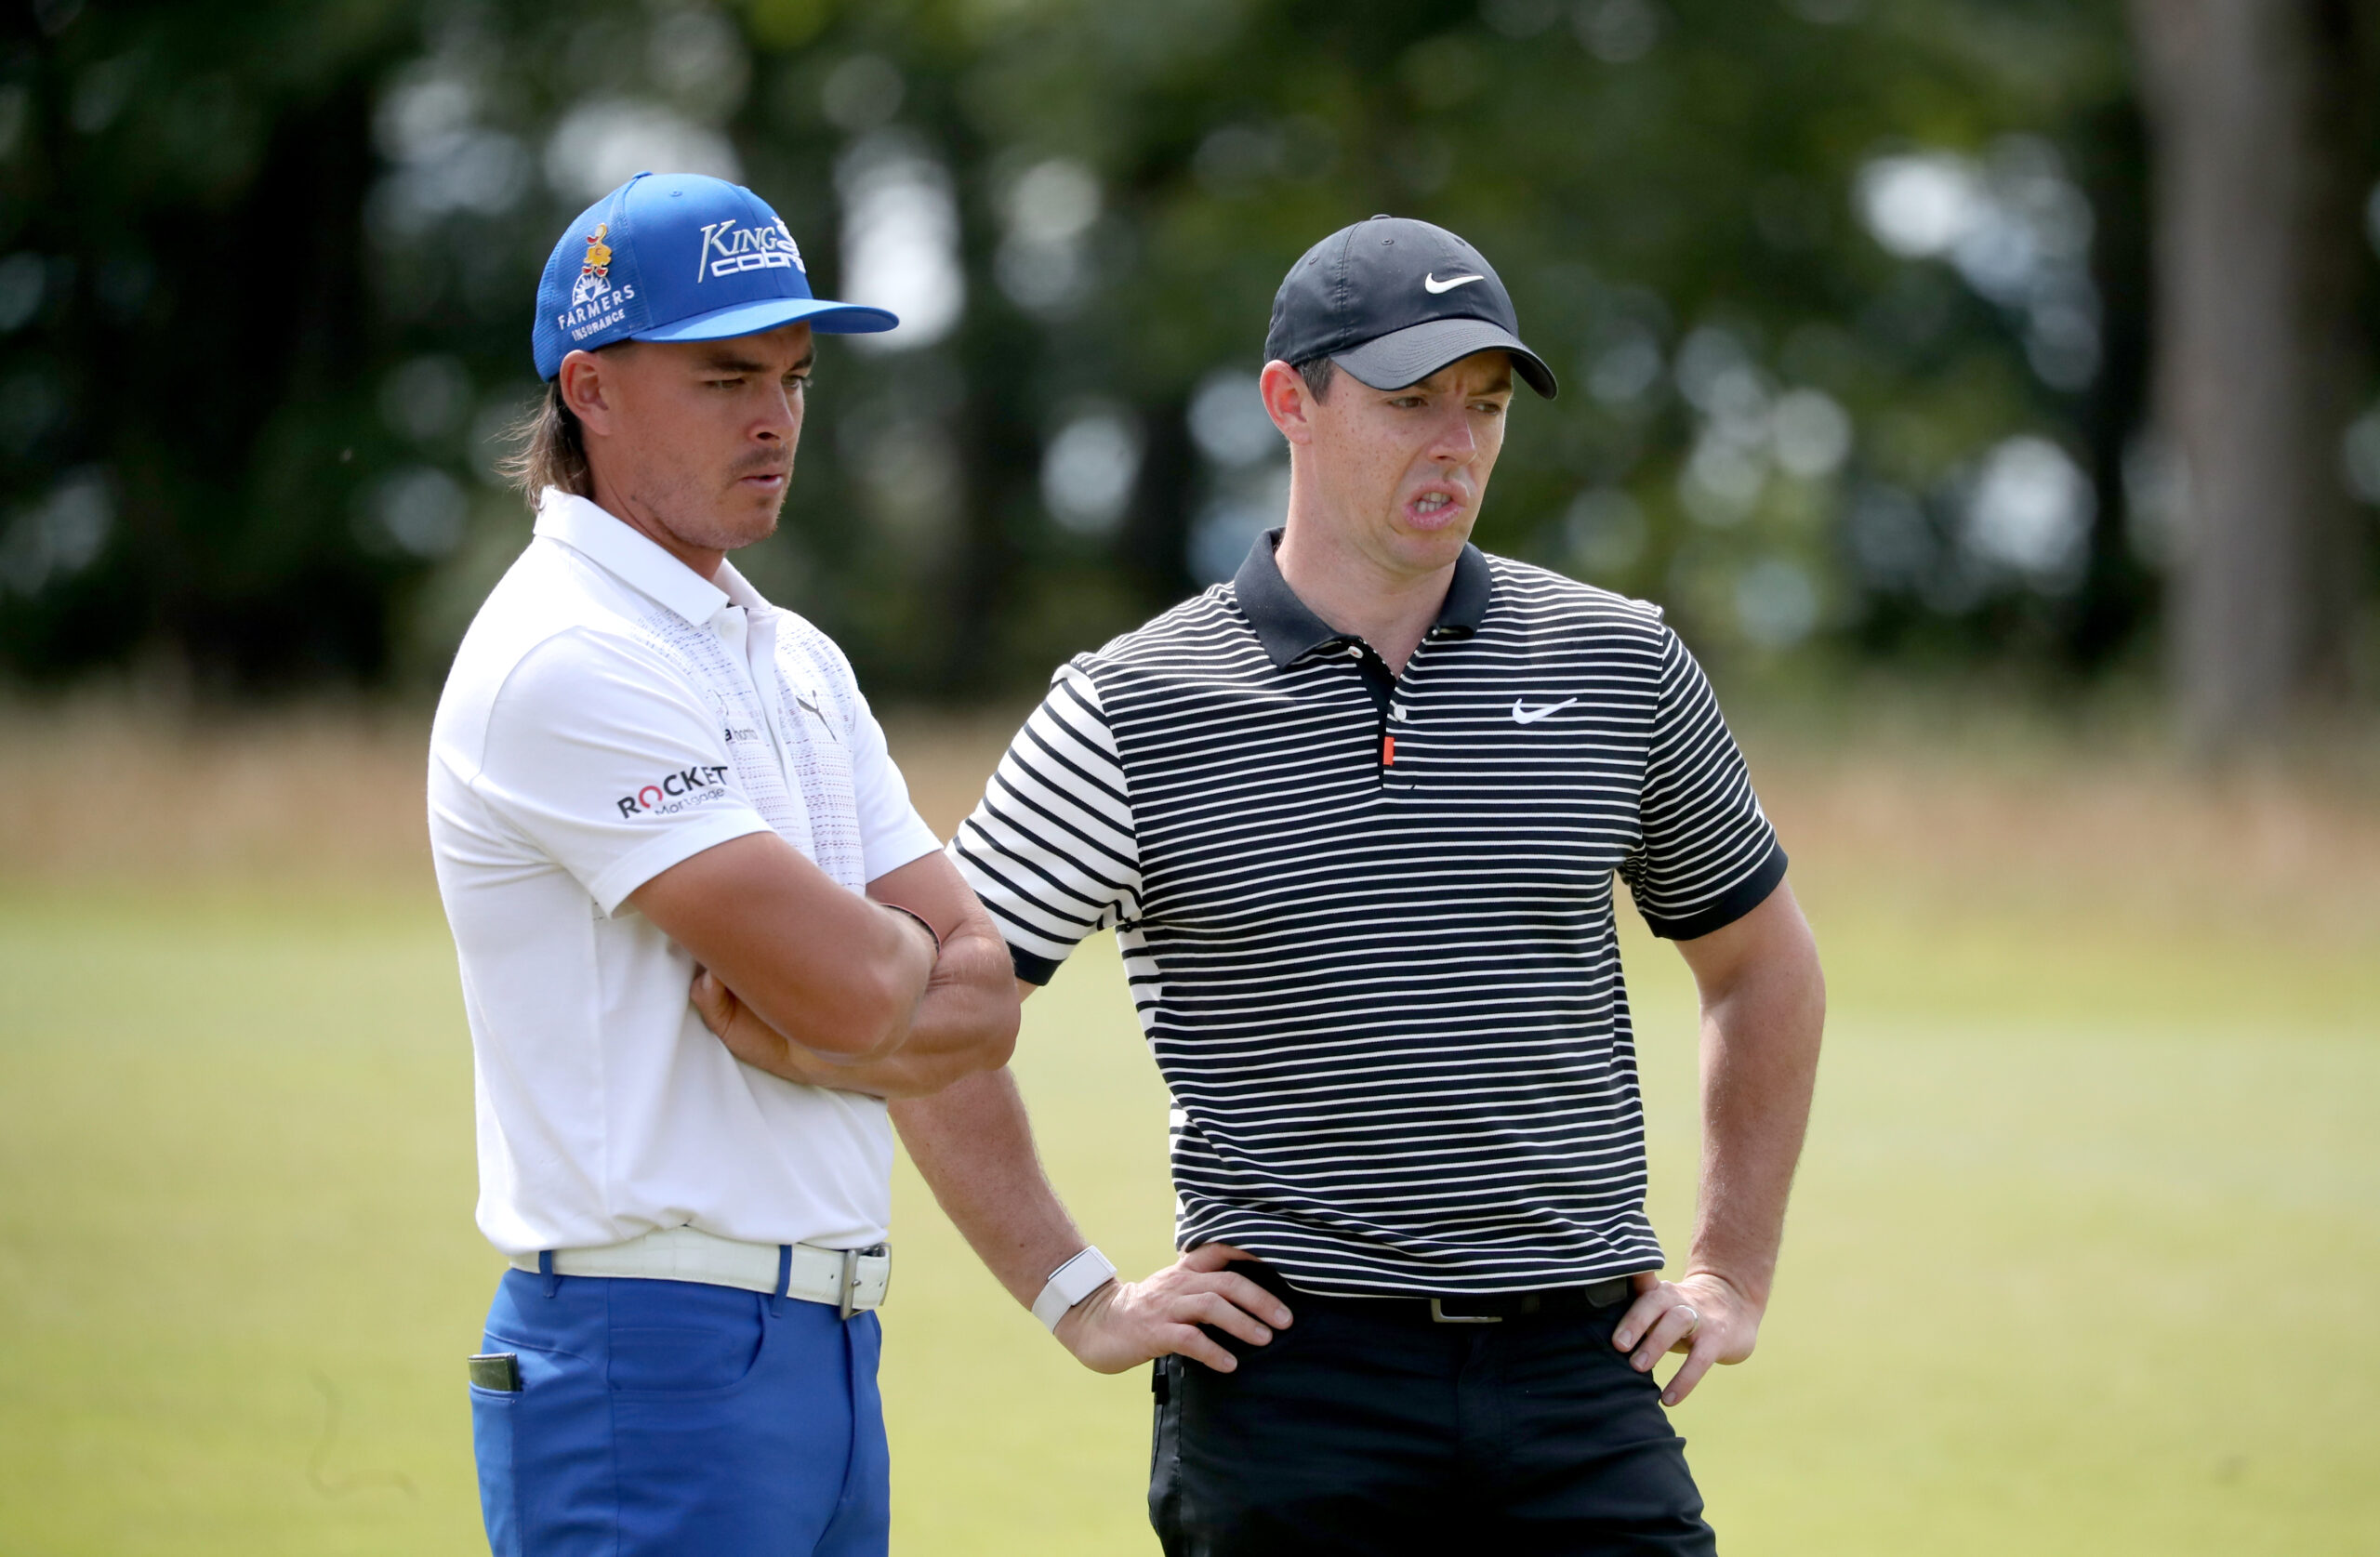 US Open 2023 R2 - Rickie Fowler &Rory McIlroy